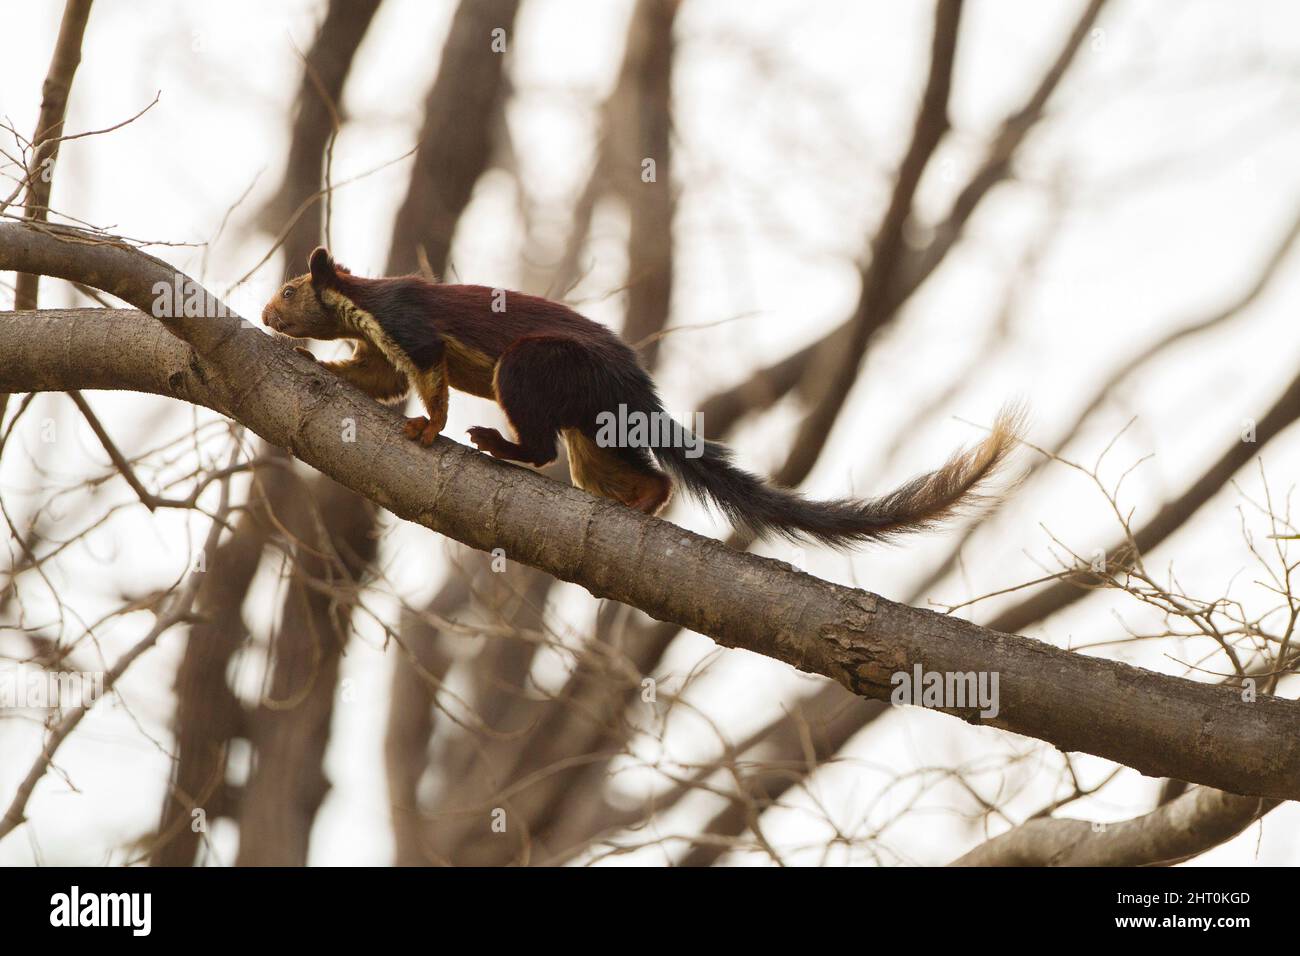 Indian giant squirrel (Ratufa indica), the world’s largest squirrel, almost a metre long, tip to tip. Satpura National Park, Madhya Pradesh, India Stock Photo